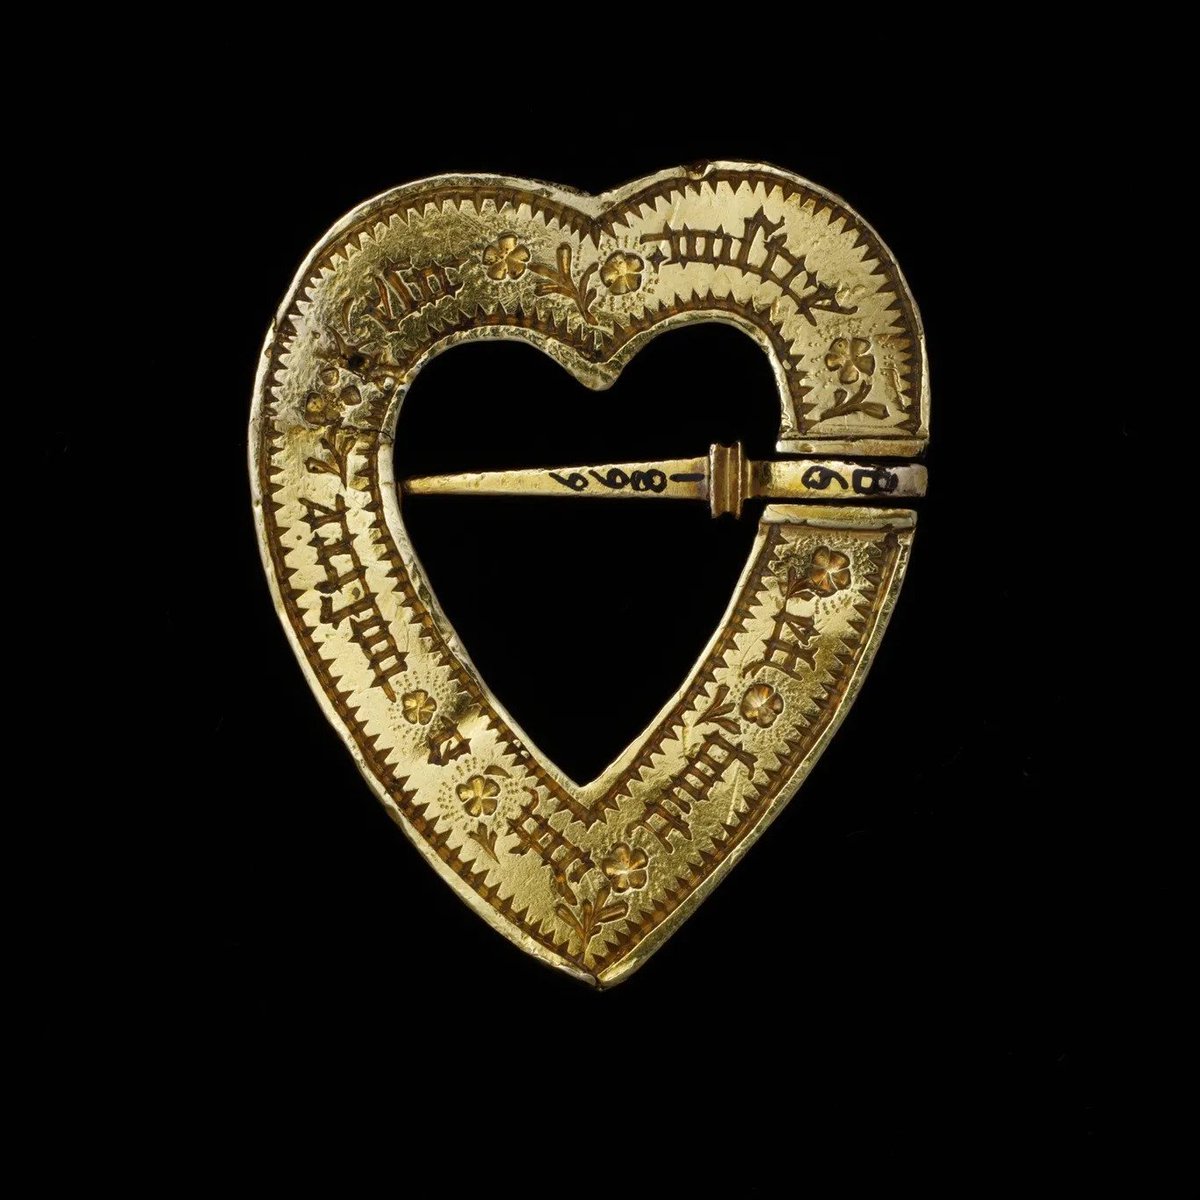 Reverse of a gold brooch, inscribed in Medieval French 'Ours and Always at your Desire', 1400s. Collection: The Victoria & Albert Museum. Via: Erica Weiner.